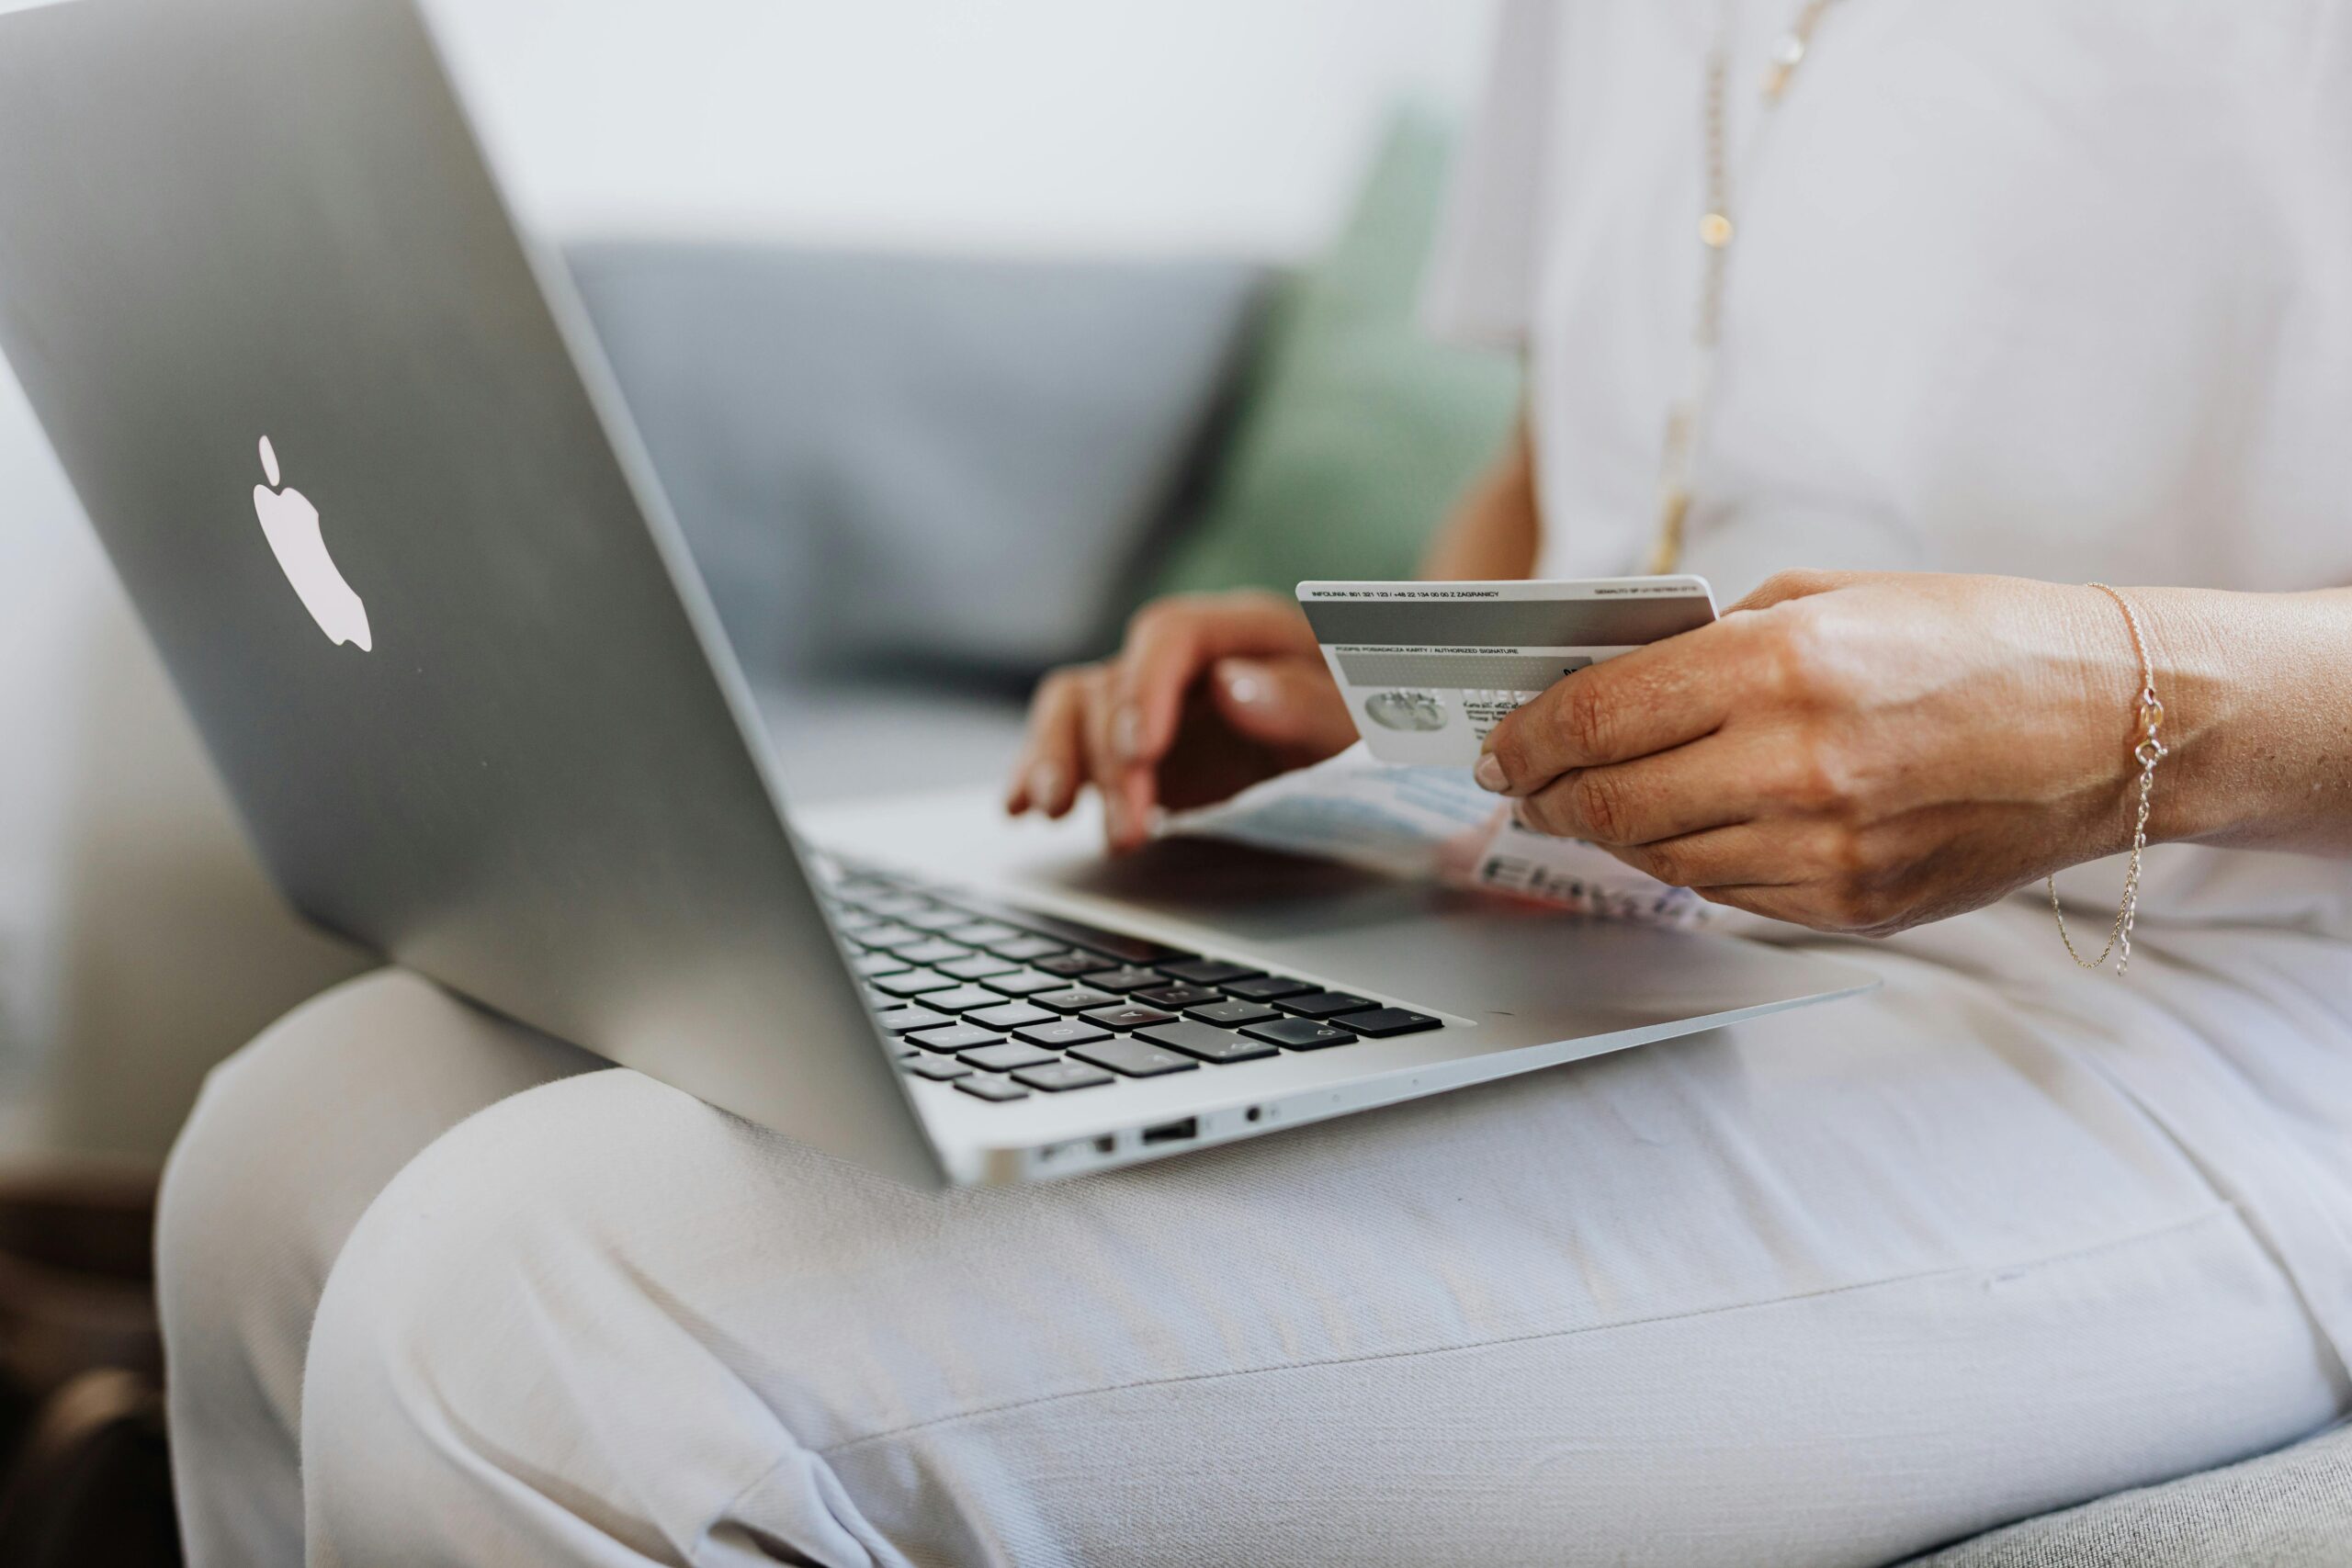 computer on person's lap, credit card in hands as if to shop online